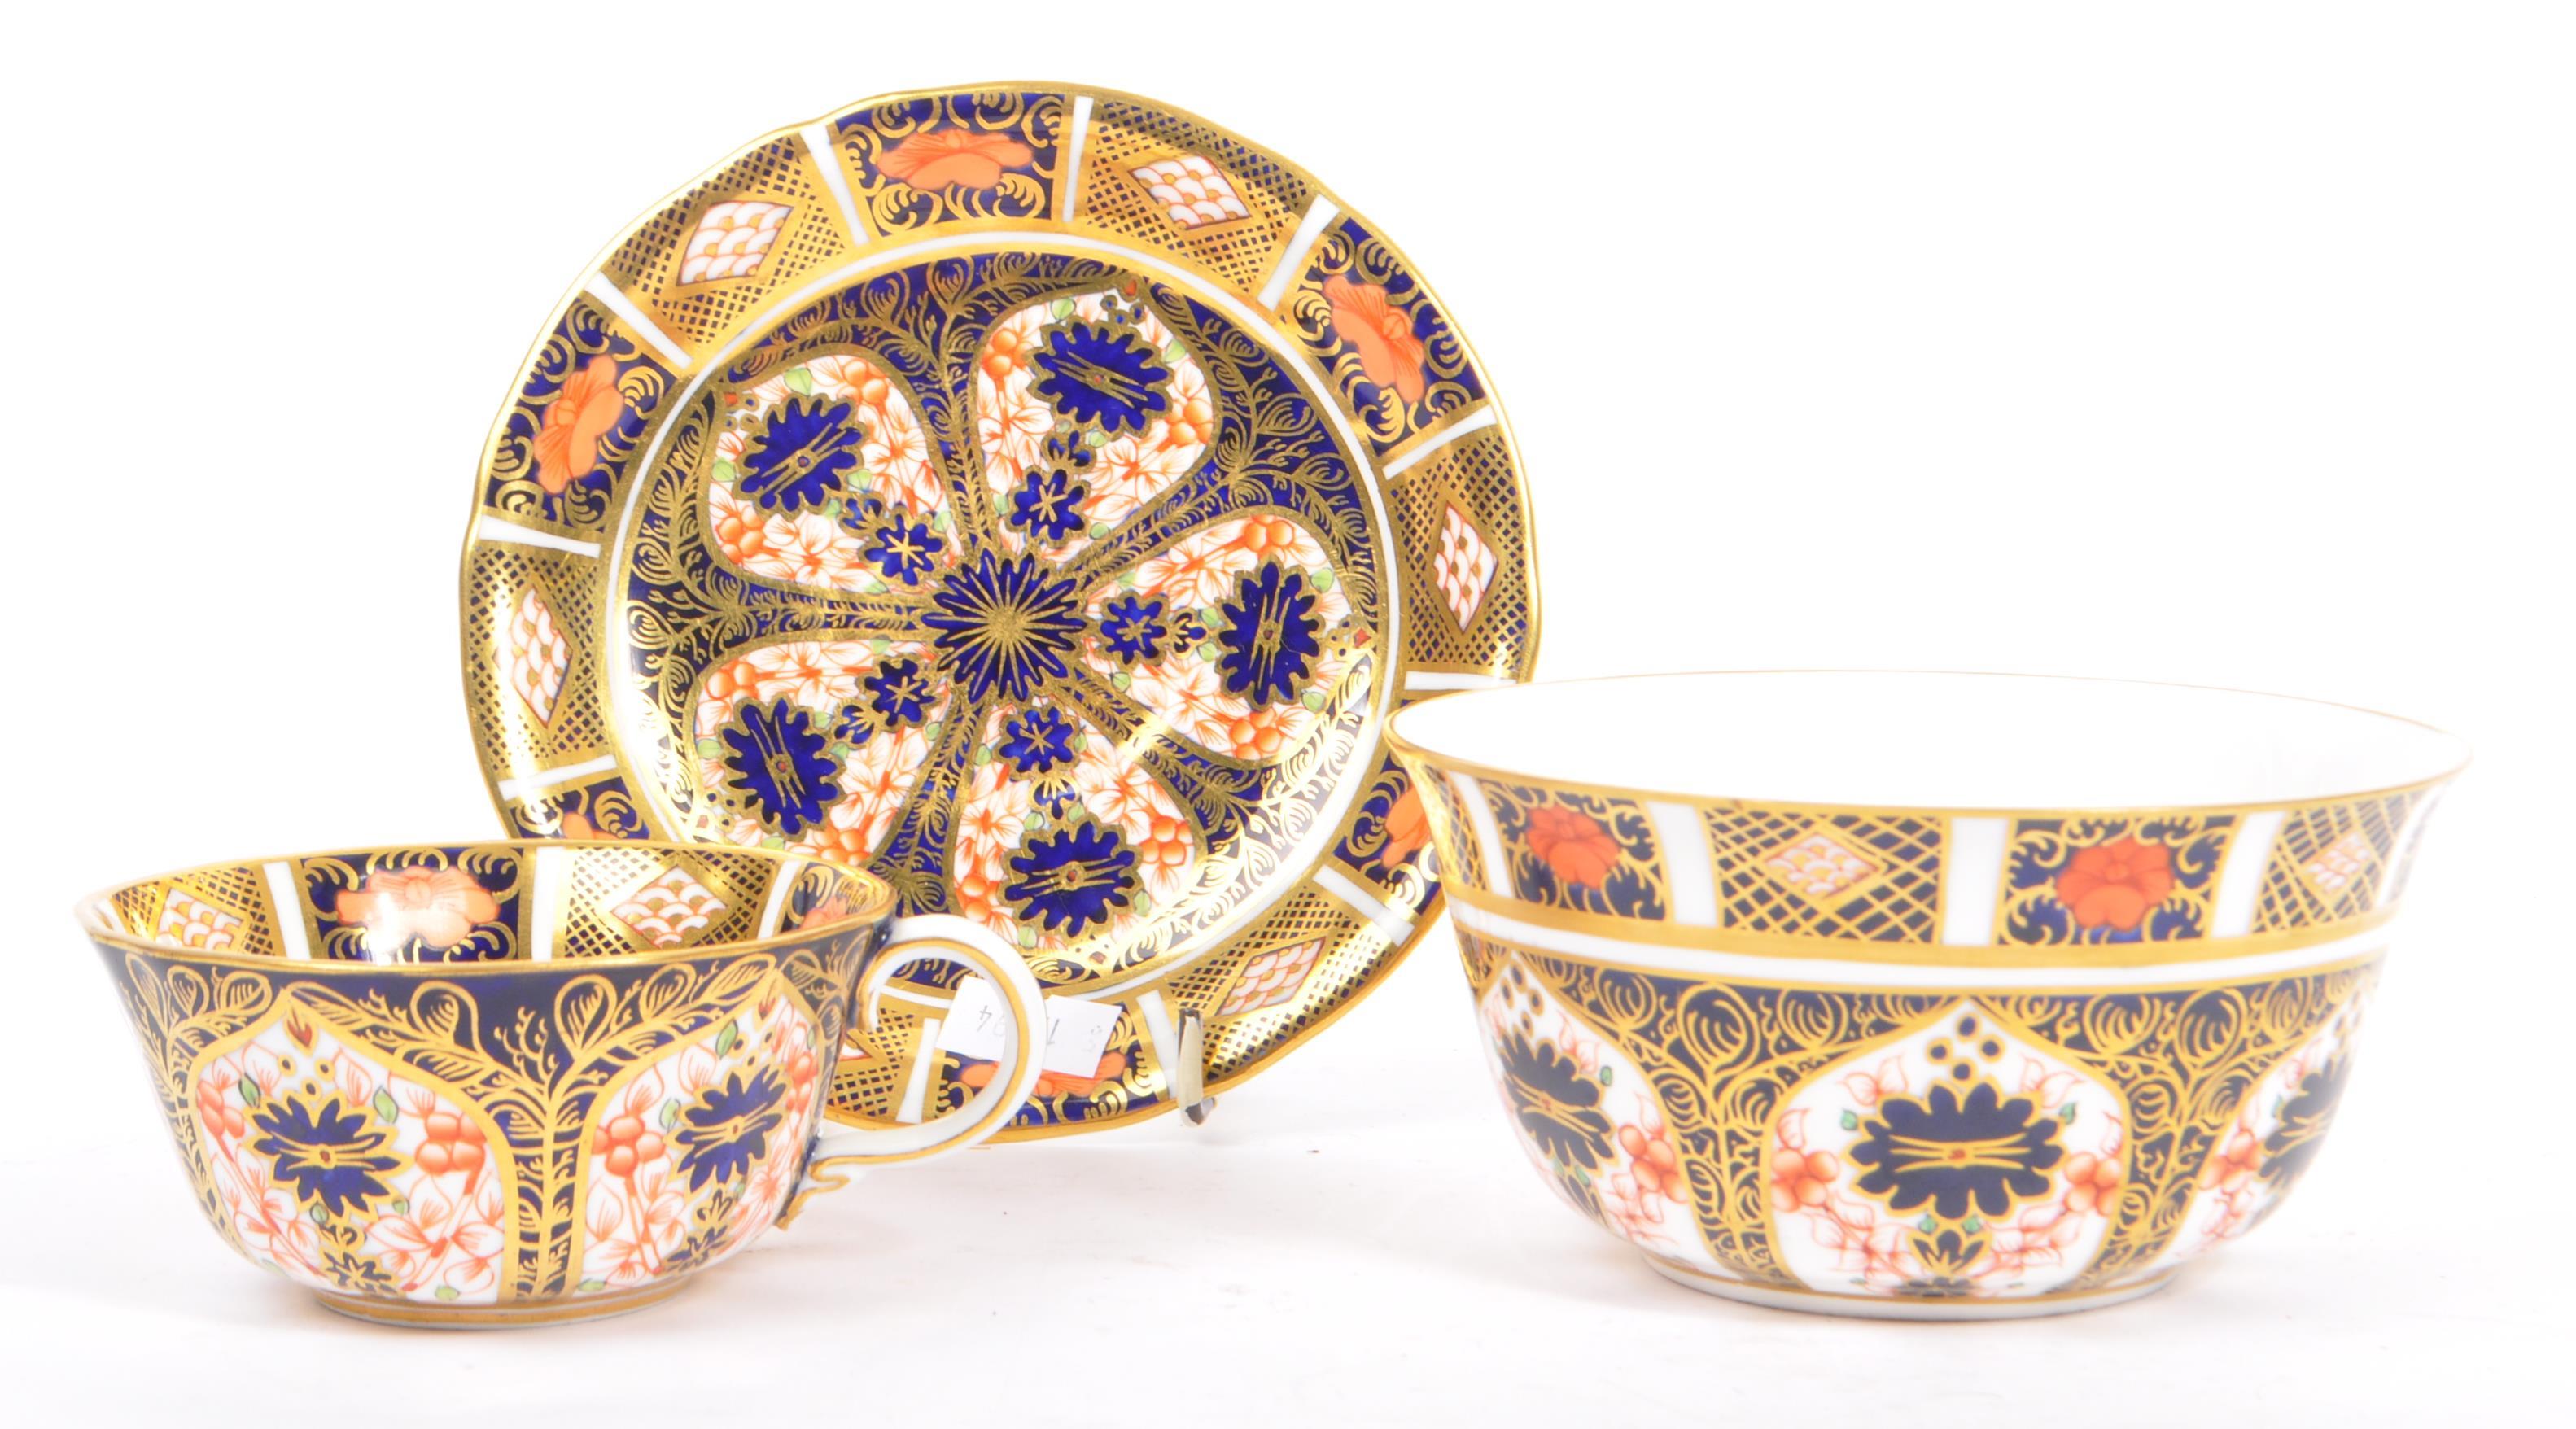 COLLECTION OF ROYAL CROWN DERBY IMARI PATTERN CHINA EXAMPLES